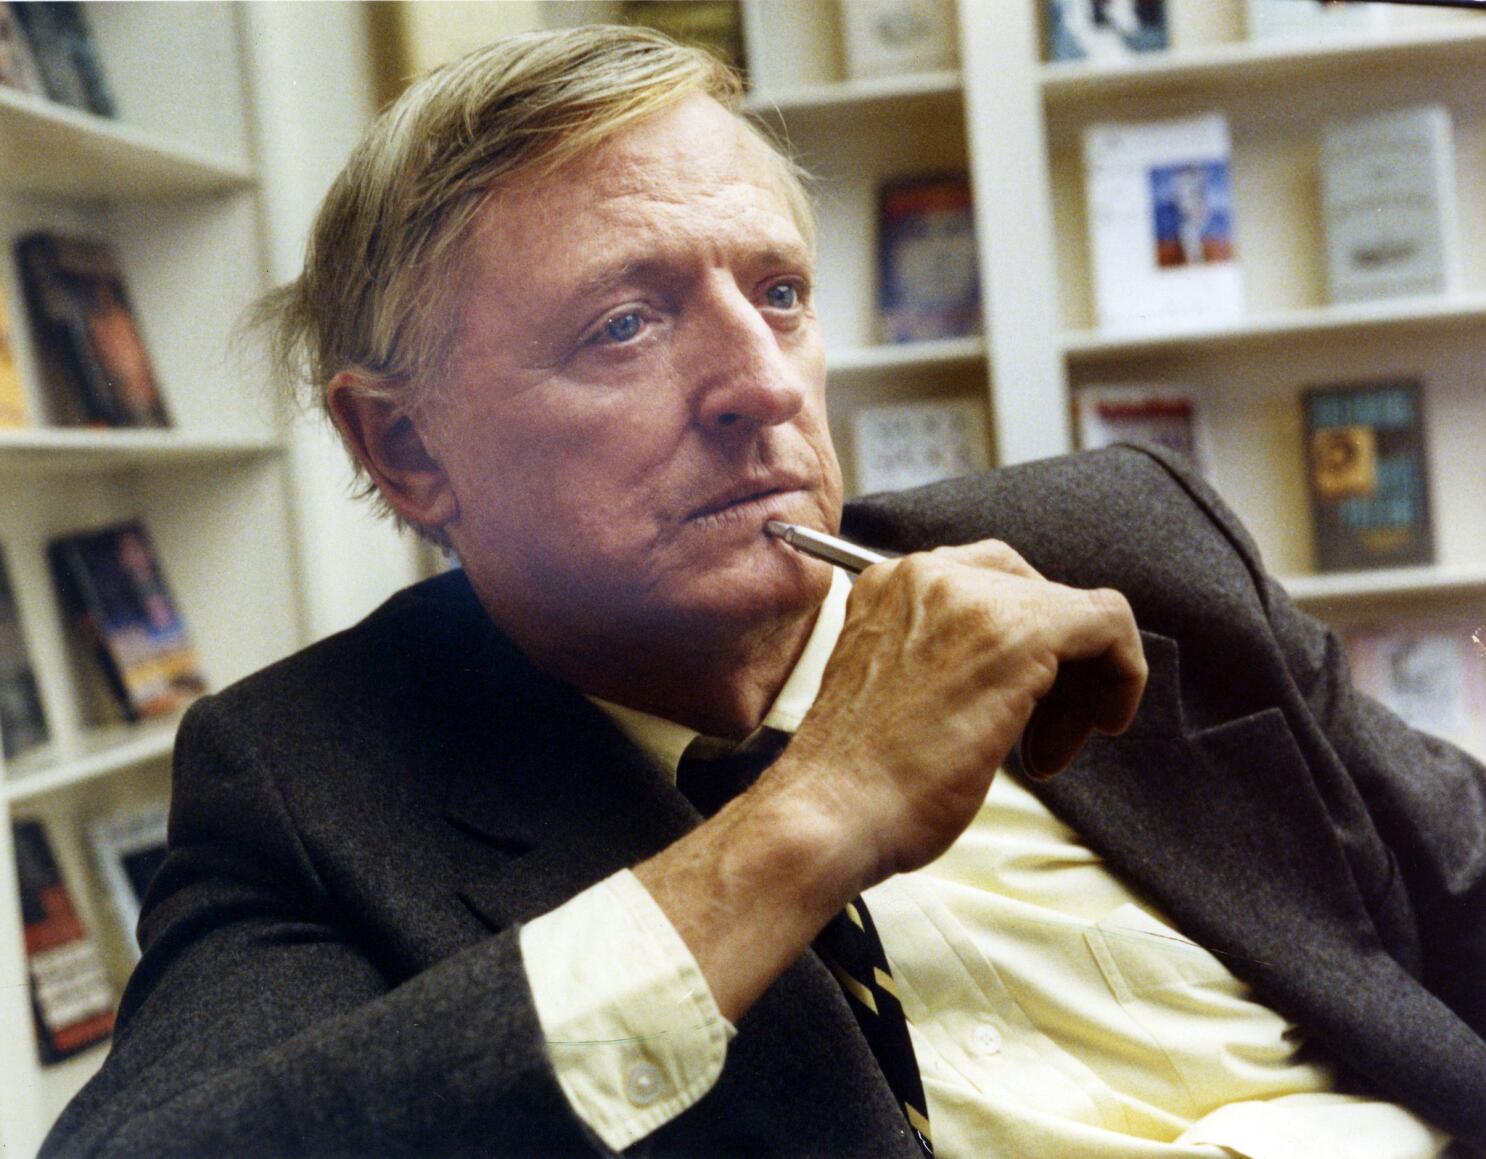 William F. Buckley captained conservatism before it was hijacked